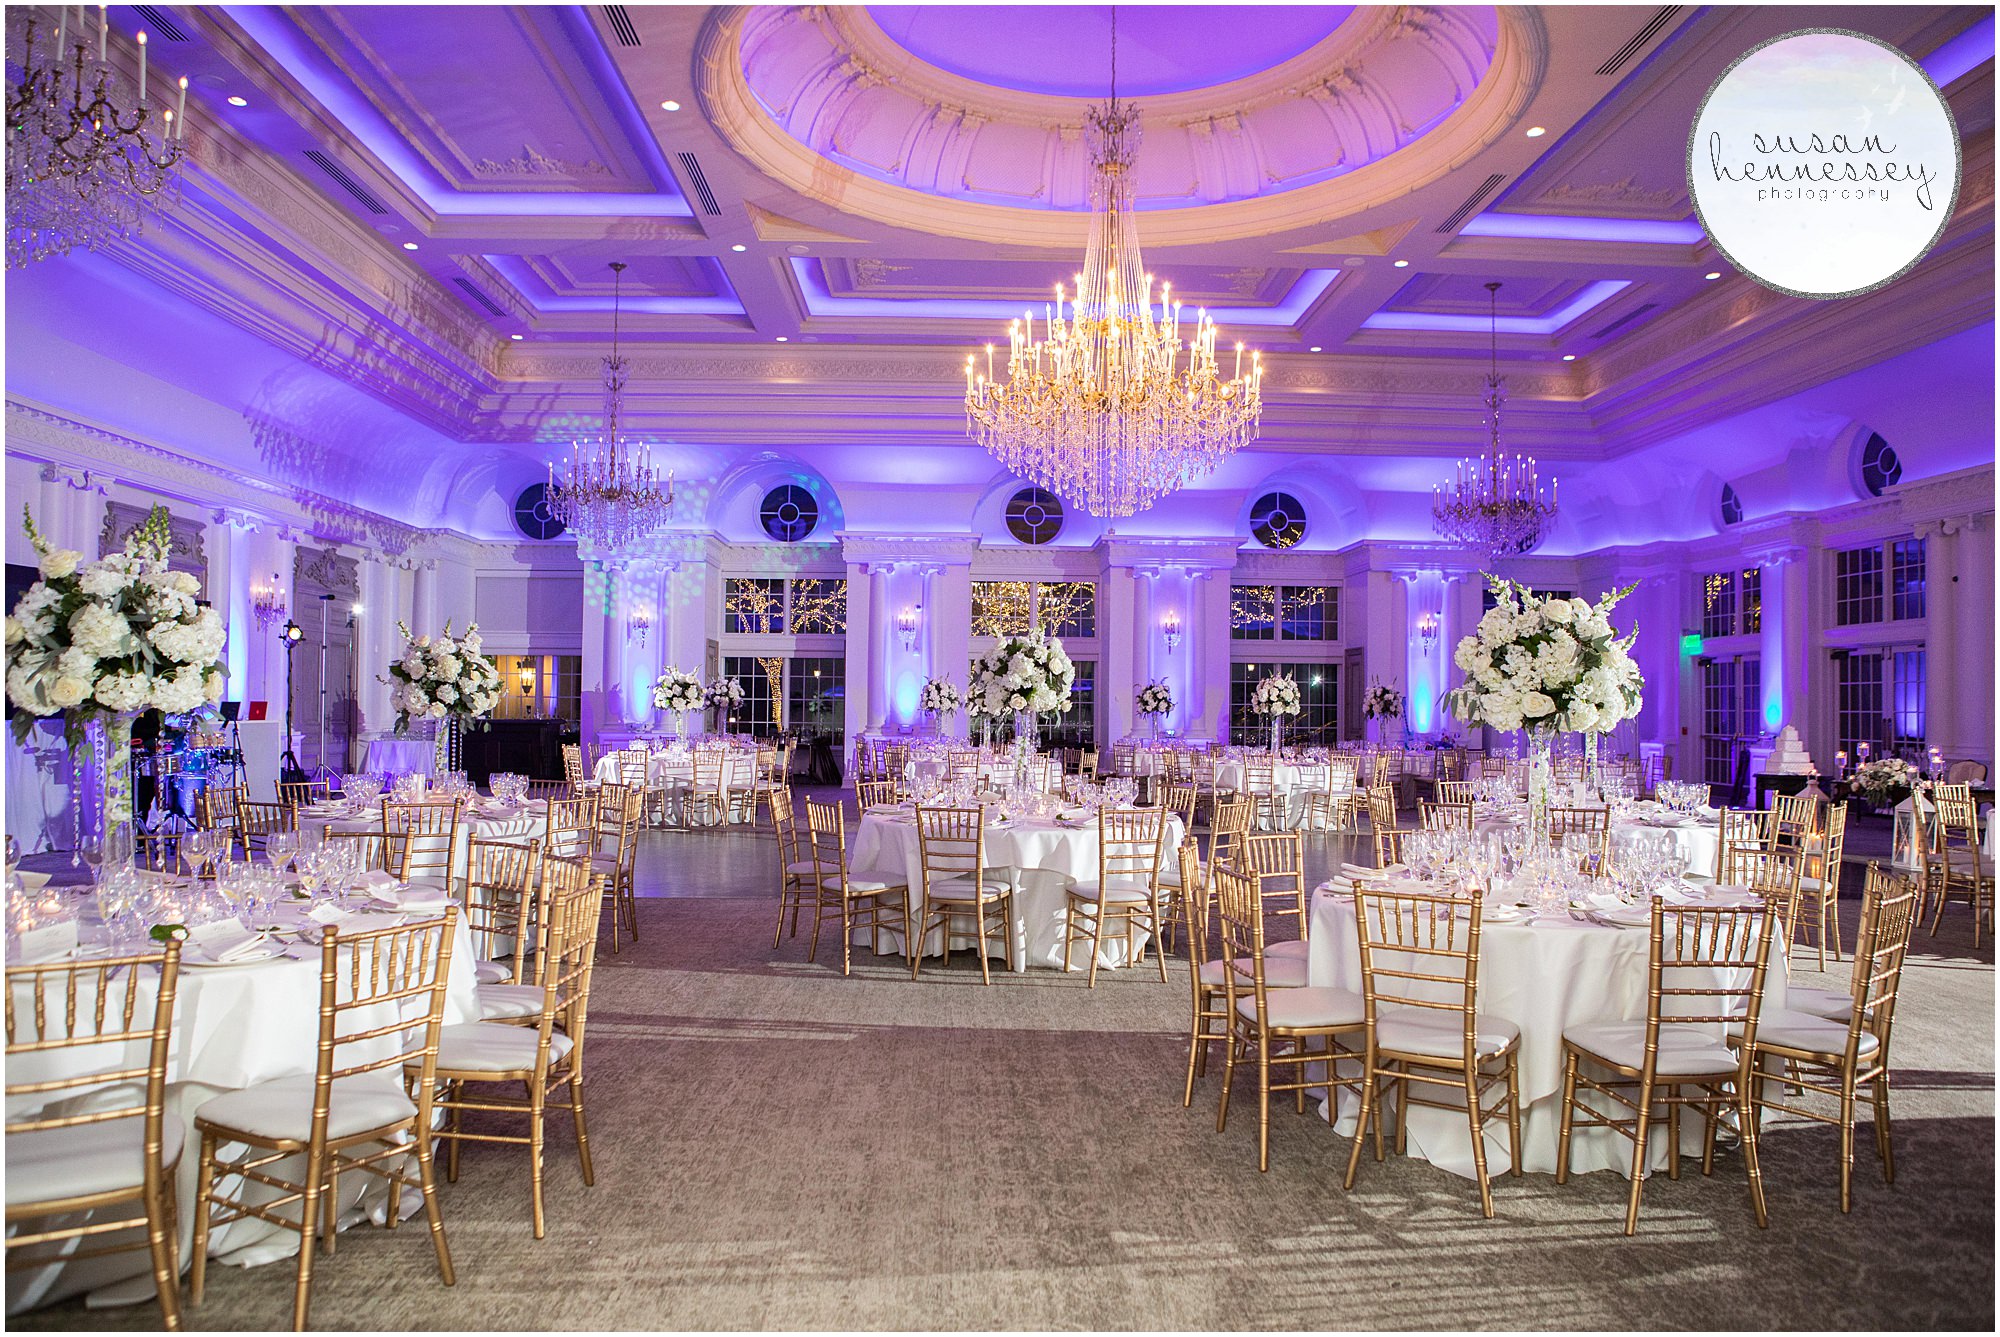 Ballroom details at the beautiful and elegant Park Chateau.